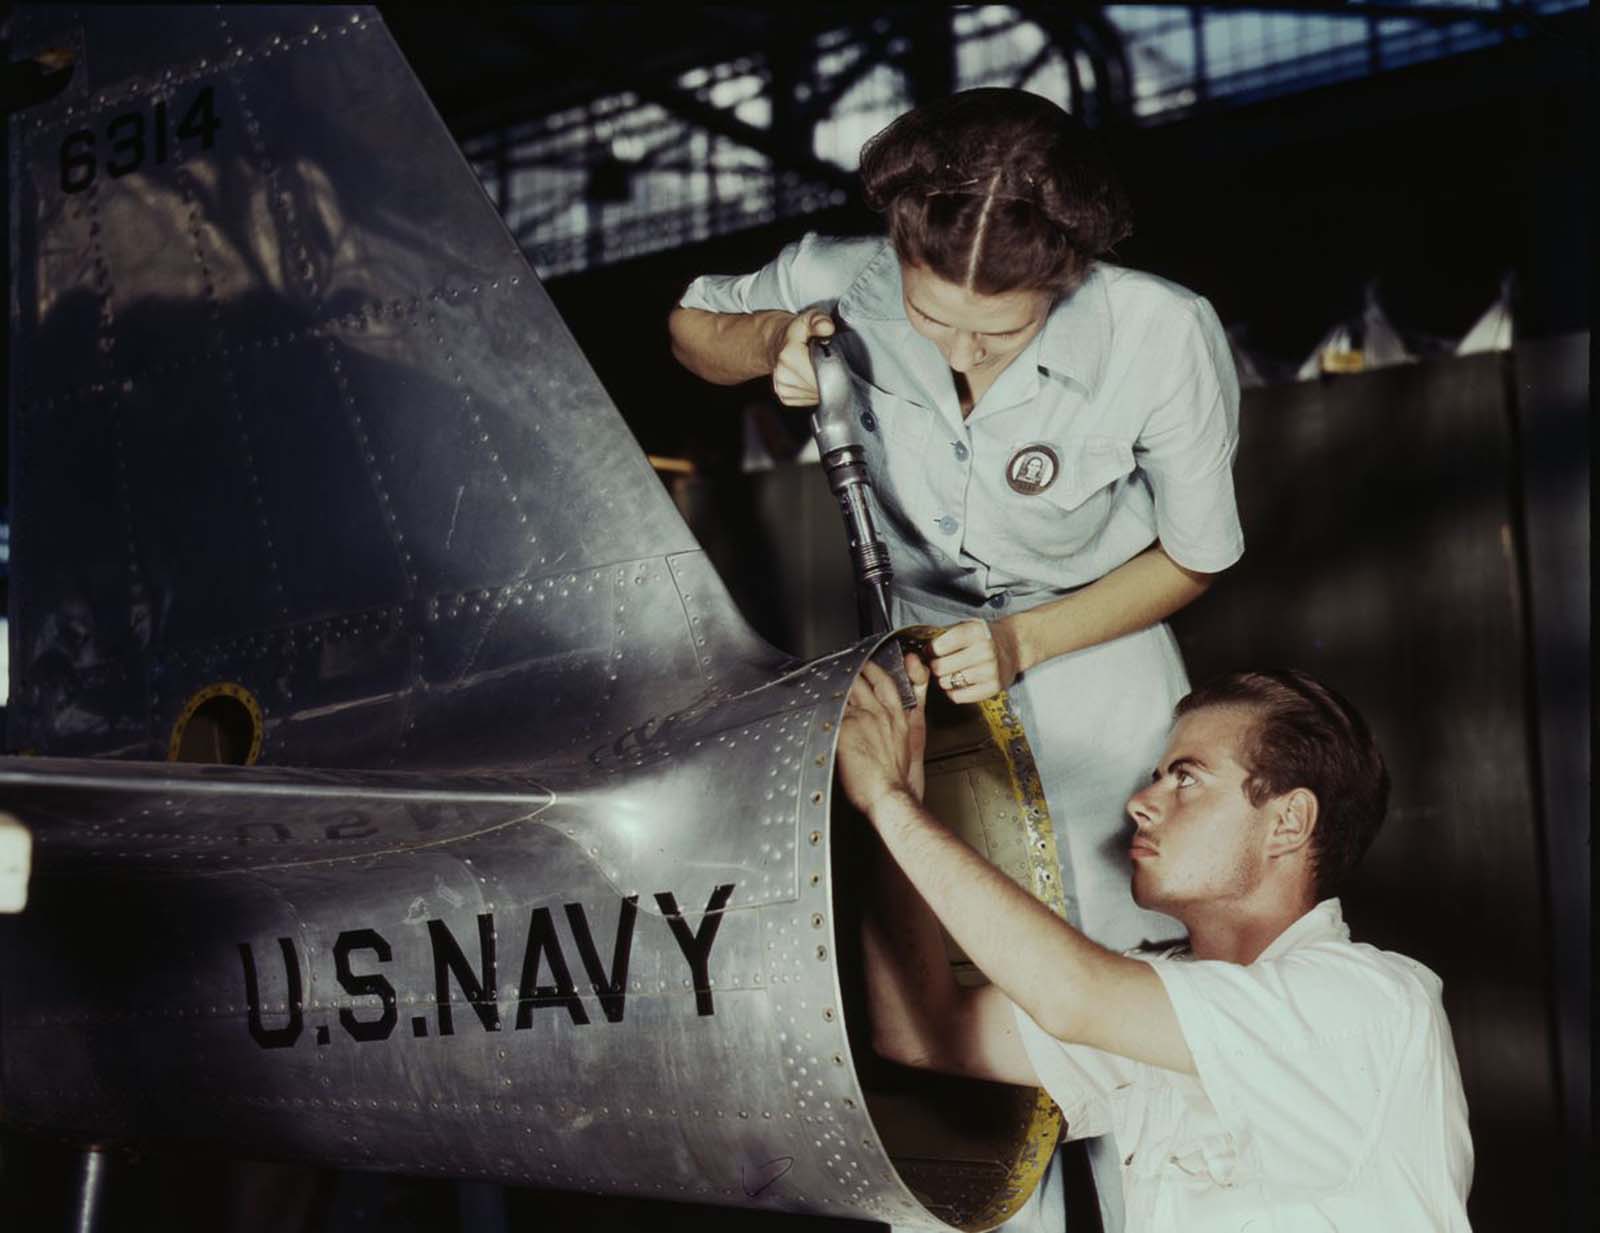 Virginia Davis, a riveter in the assembly and repair department of the Naval Air Base, supervises Charles Potter, an NYA trainee from Michigan.